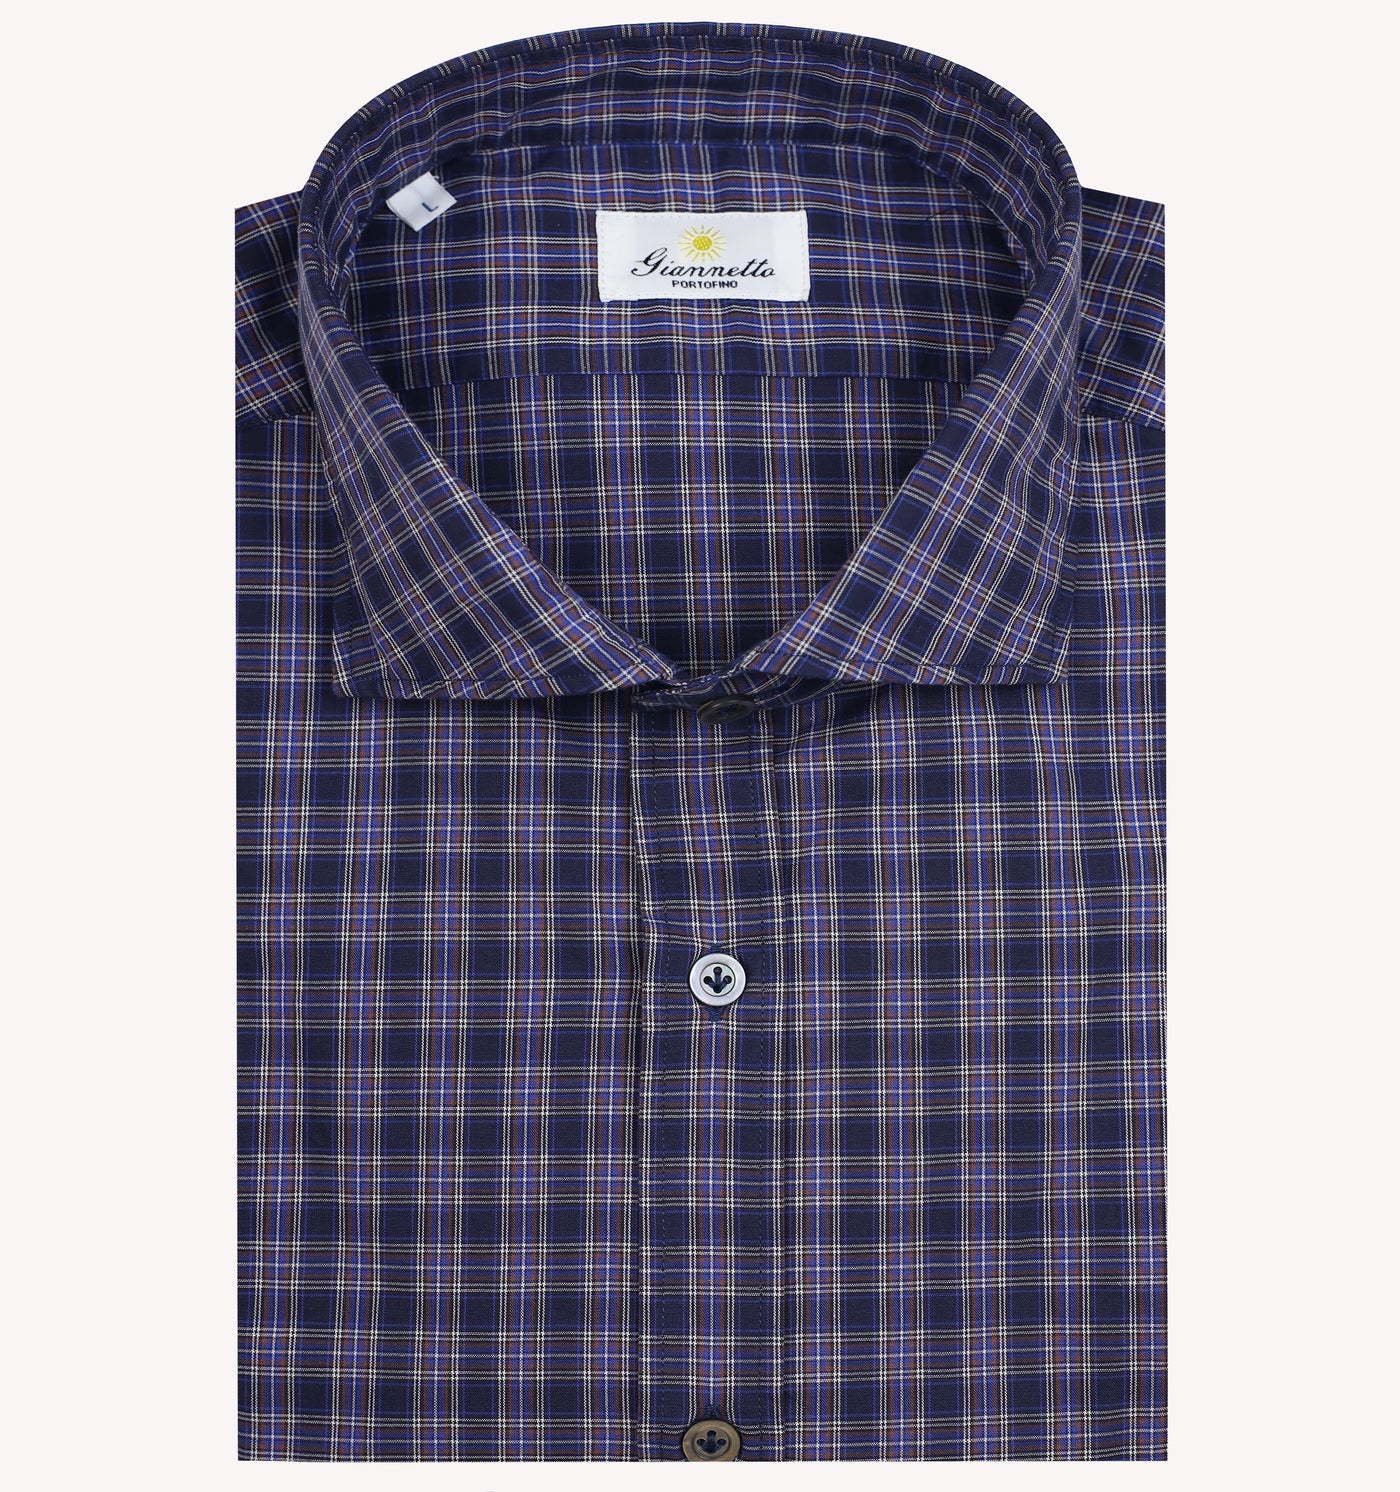 Giannetto Check Sport Shirt in Navy Rust